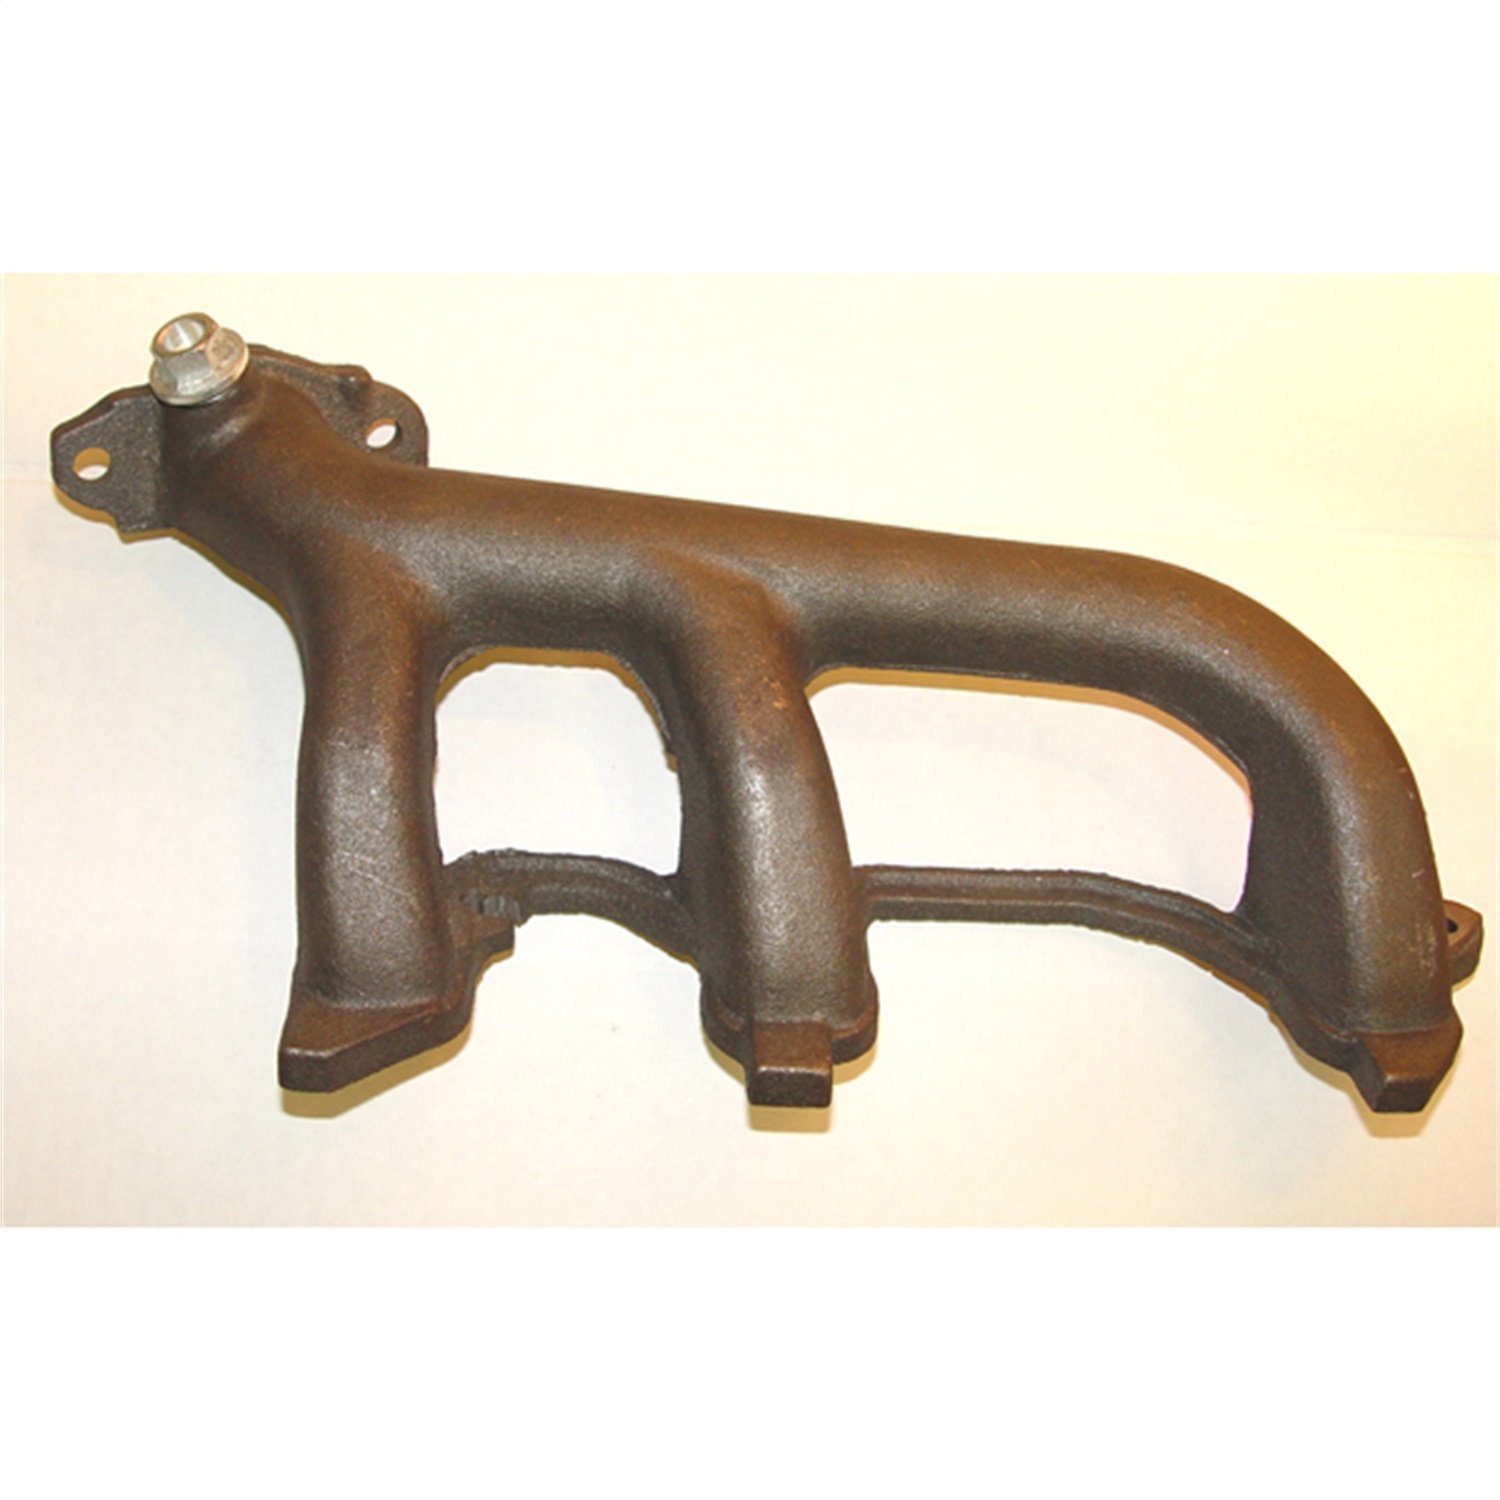 This exhaust manifold front section from Omix-ADA fits 00-06 Jeep Wrangler 00-01 Cherokees and 99-01